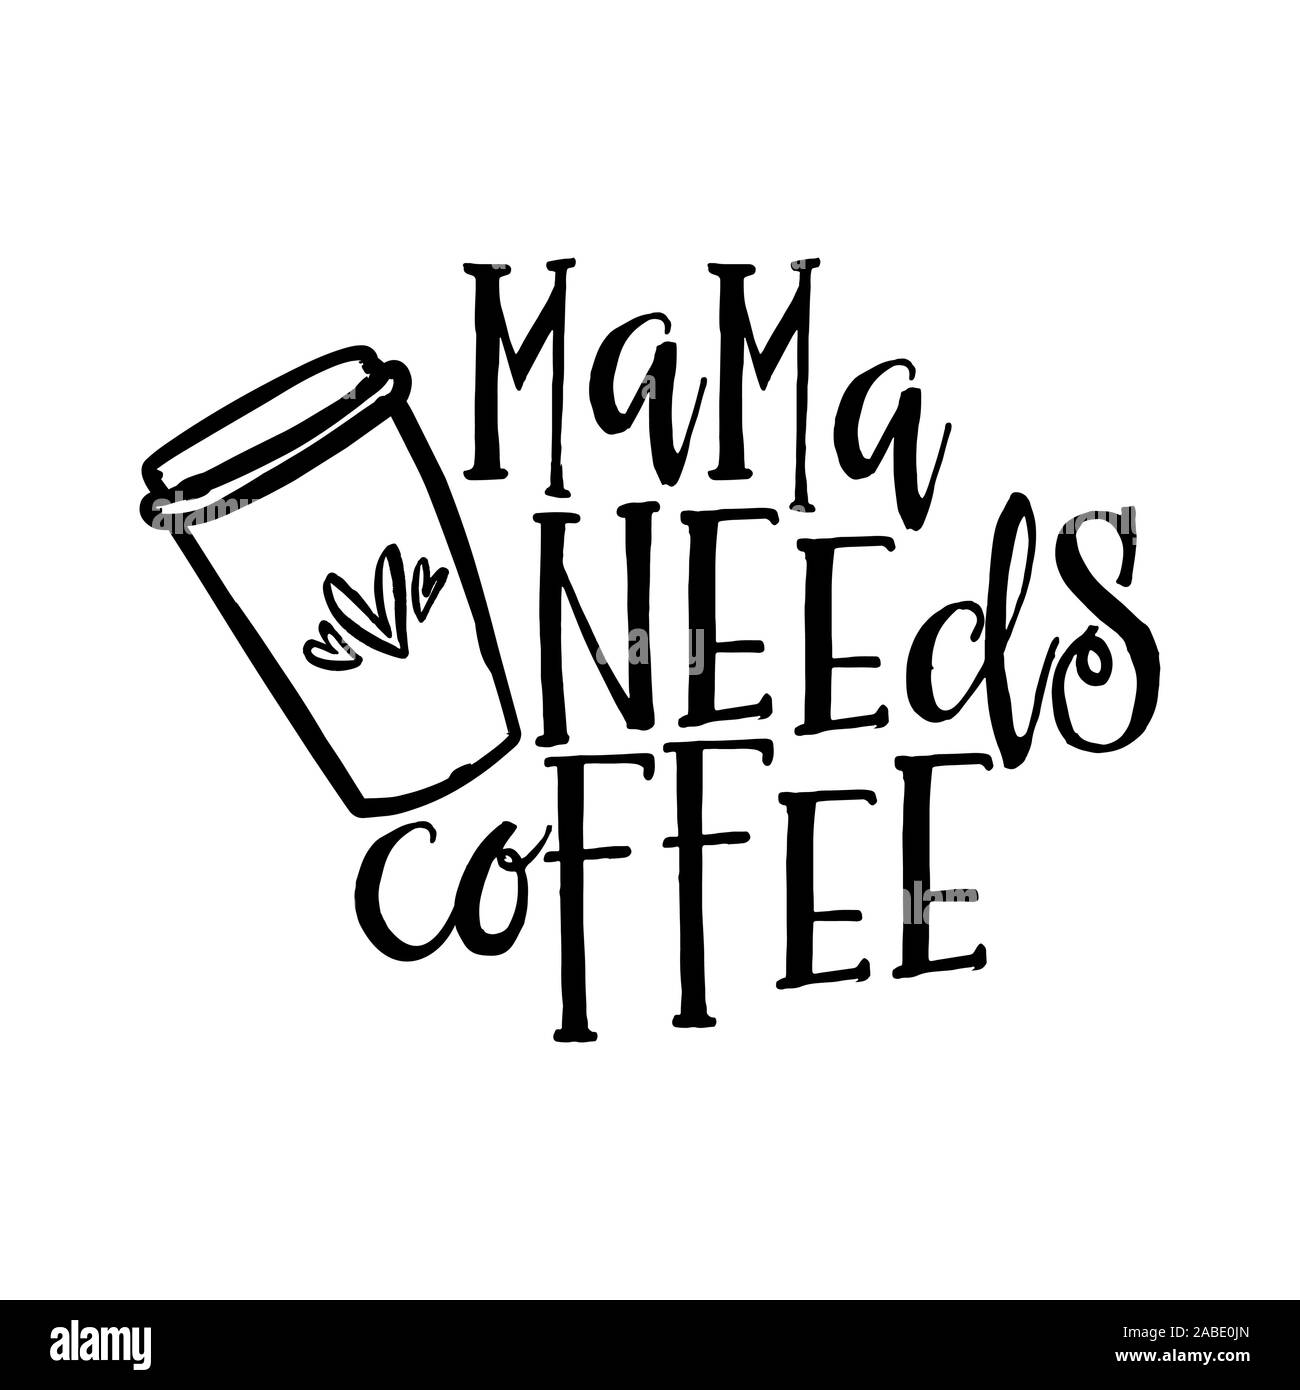 https://c8.alamy.com/comp/2ABE0JN/mama-needs-coffee-concept-with-coffee-cup-good-for-scrap-booking-motivation-posters-textiles-gifts-bar-sets-2ABE0JN.jpg